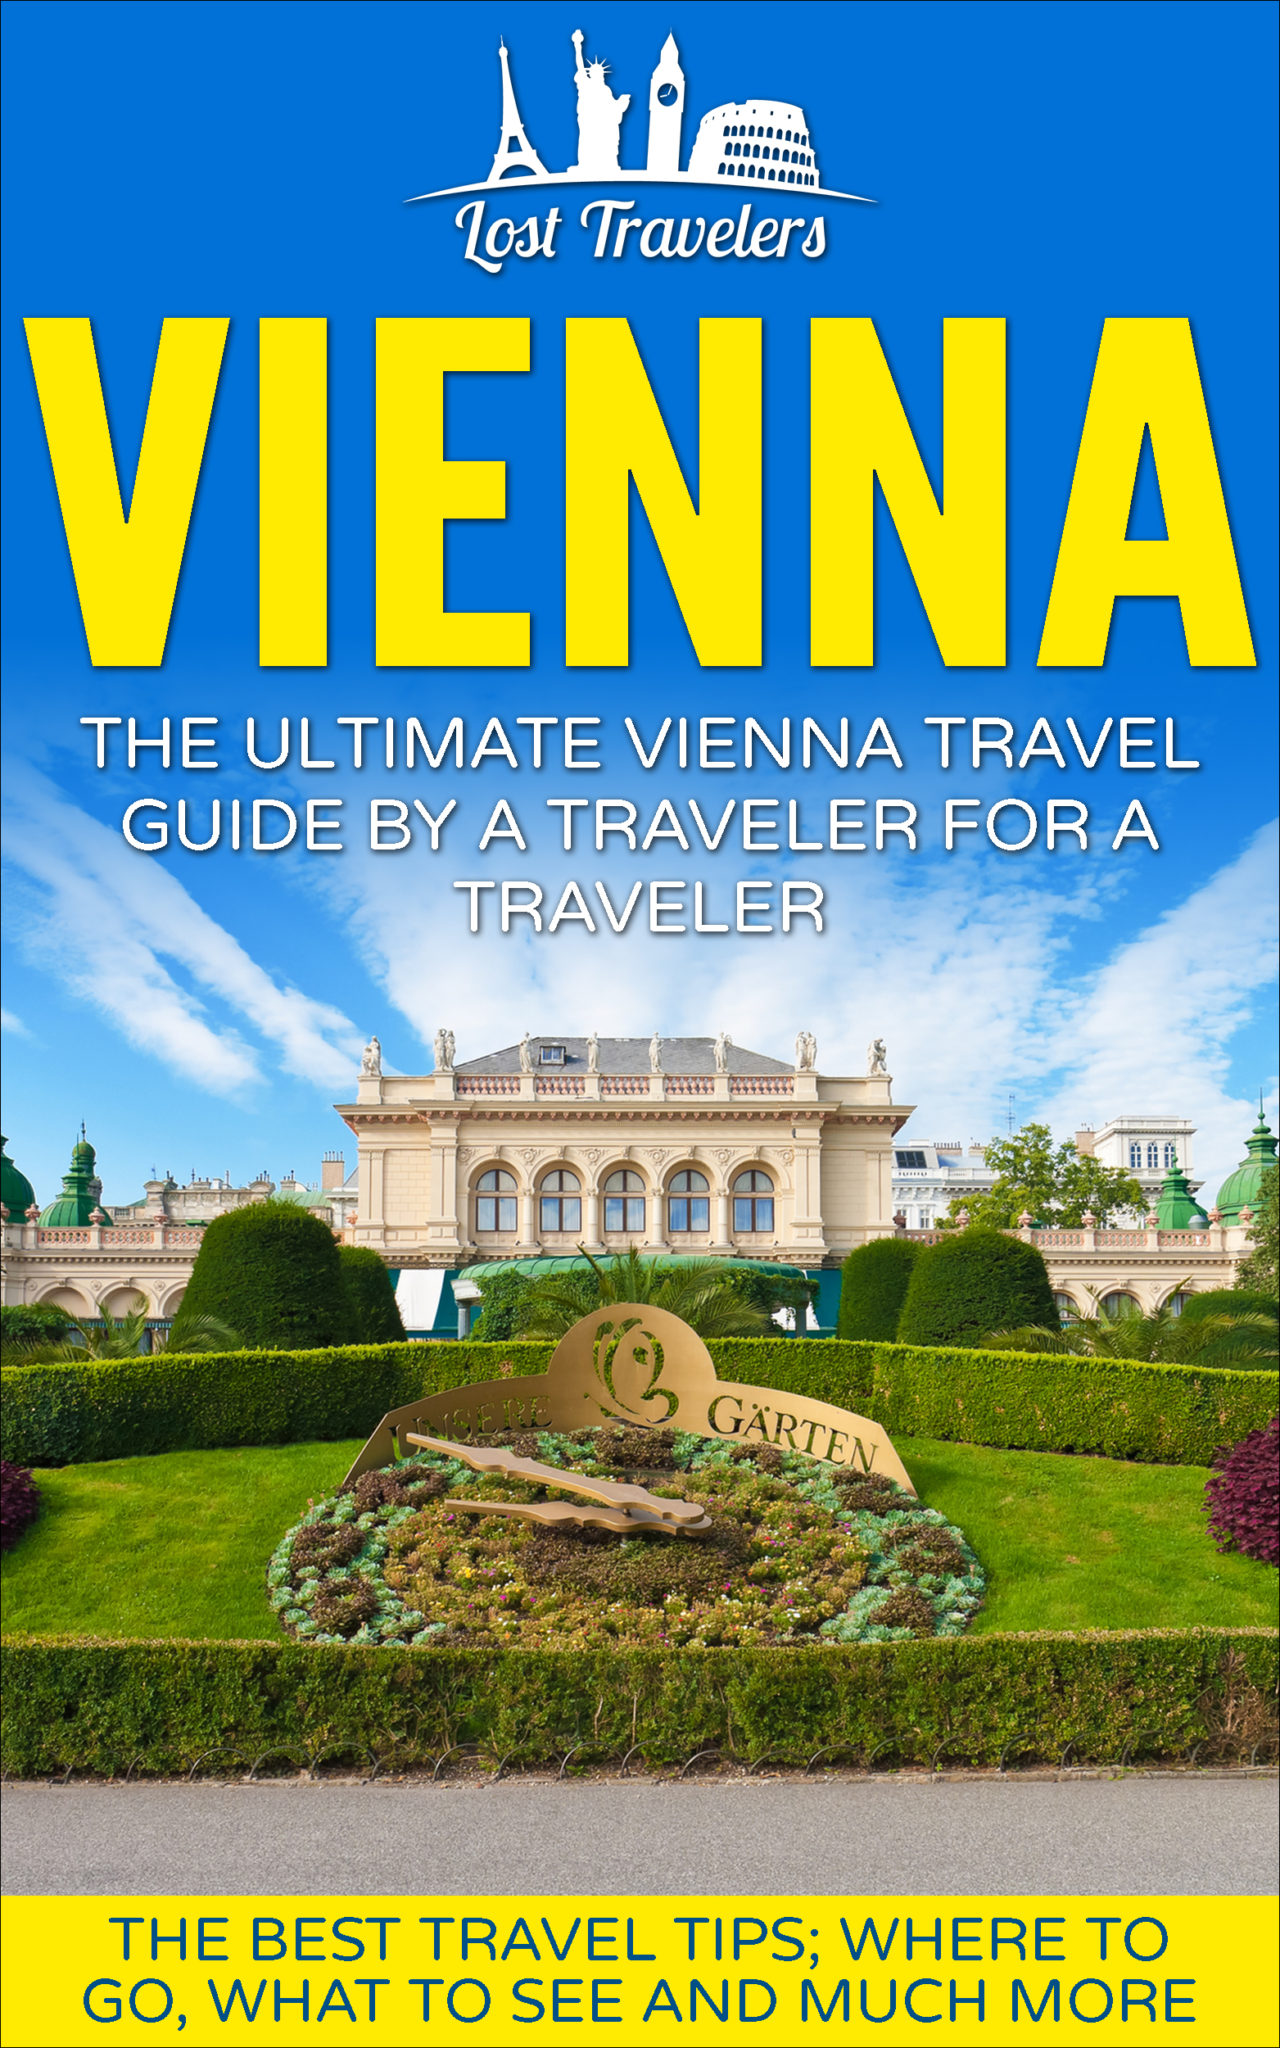 FREE: Vienna: The Ultimate Vienna Travel Guide By A Traveler For A Traveler by Lost Travelers by Lost Travelers